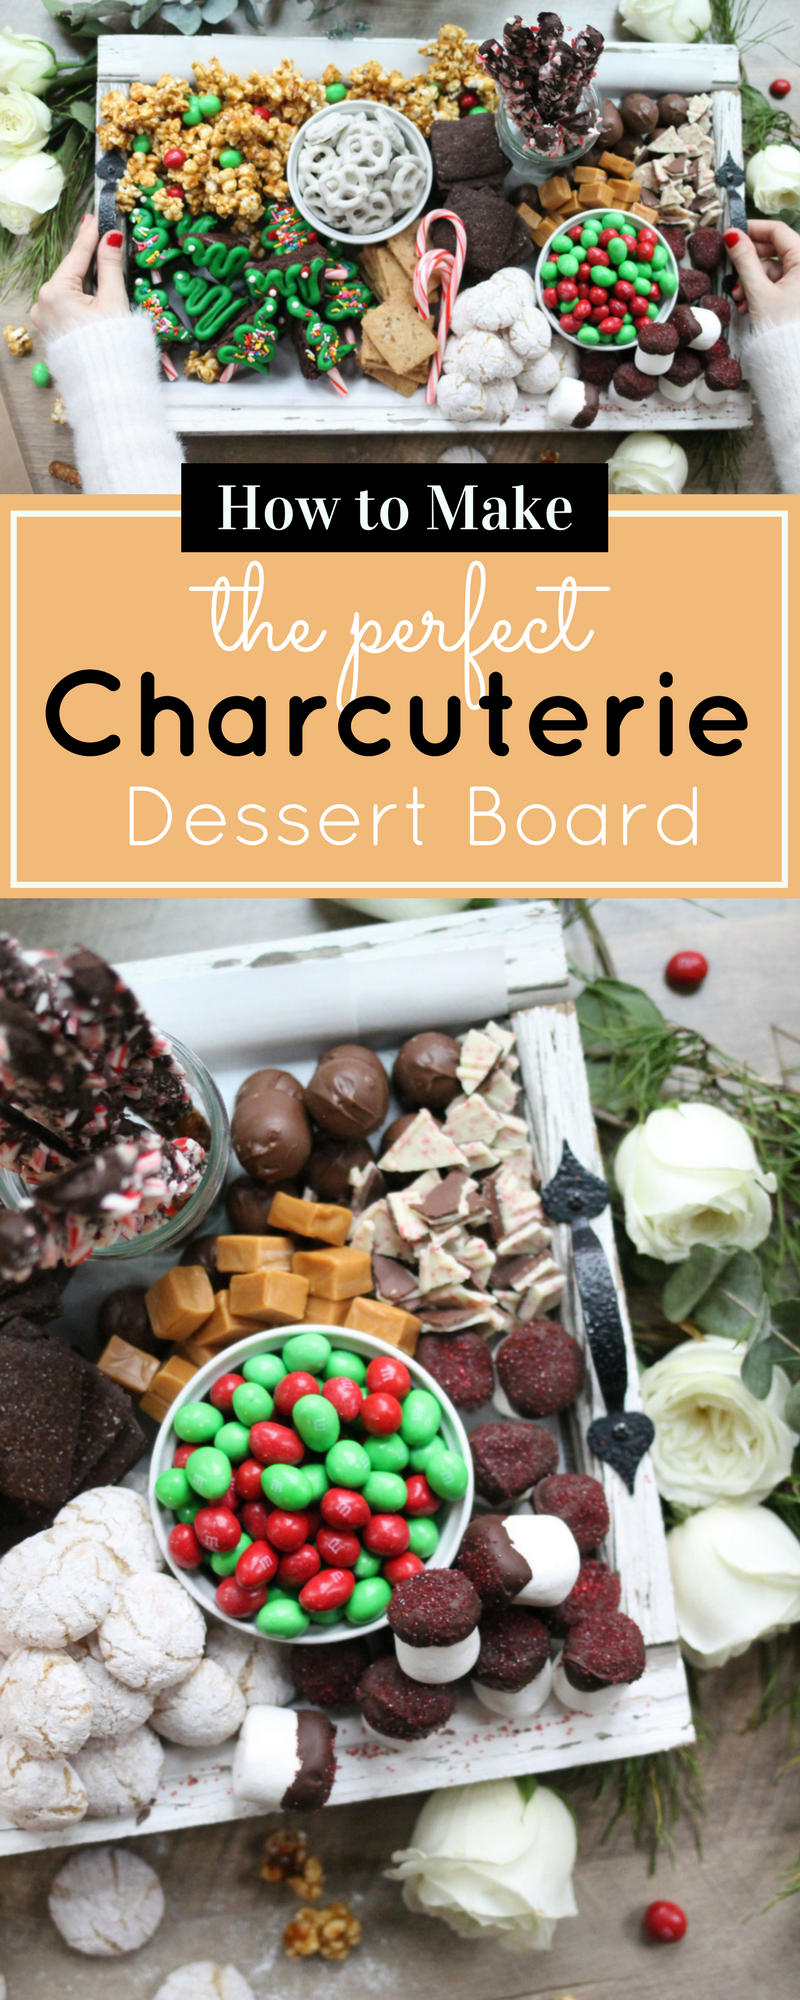 How to make the ultimate dessert snack board for the holidays; a.k.a., a sweet charcuterie spread. | glitterinc.com | @glitterinc